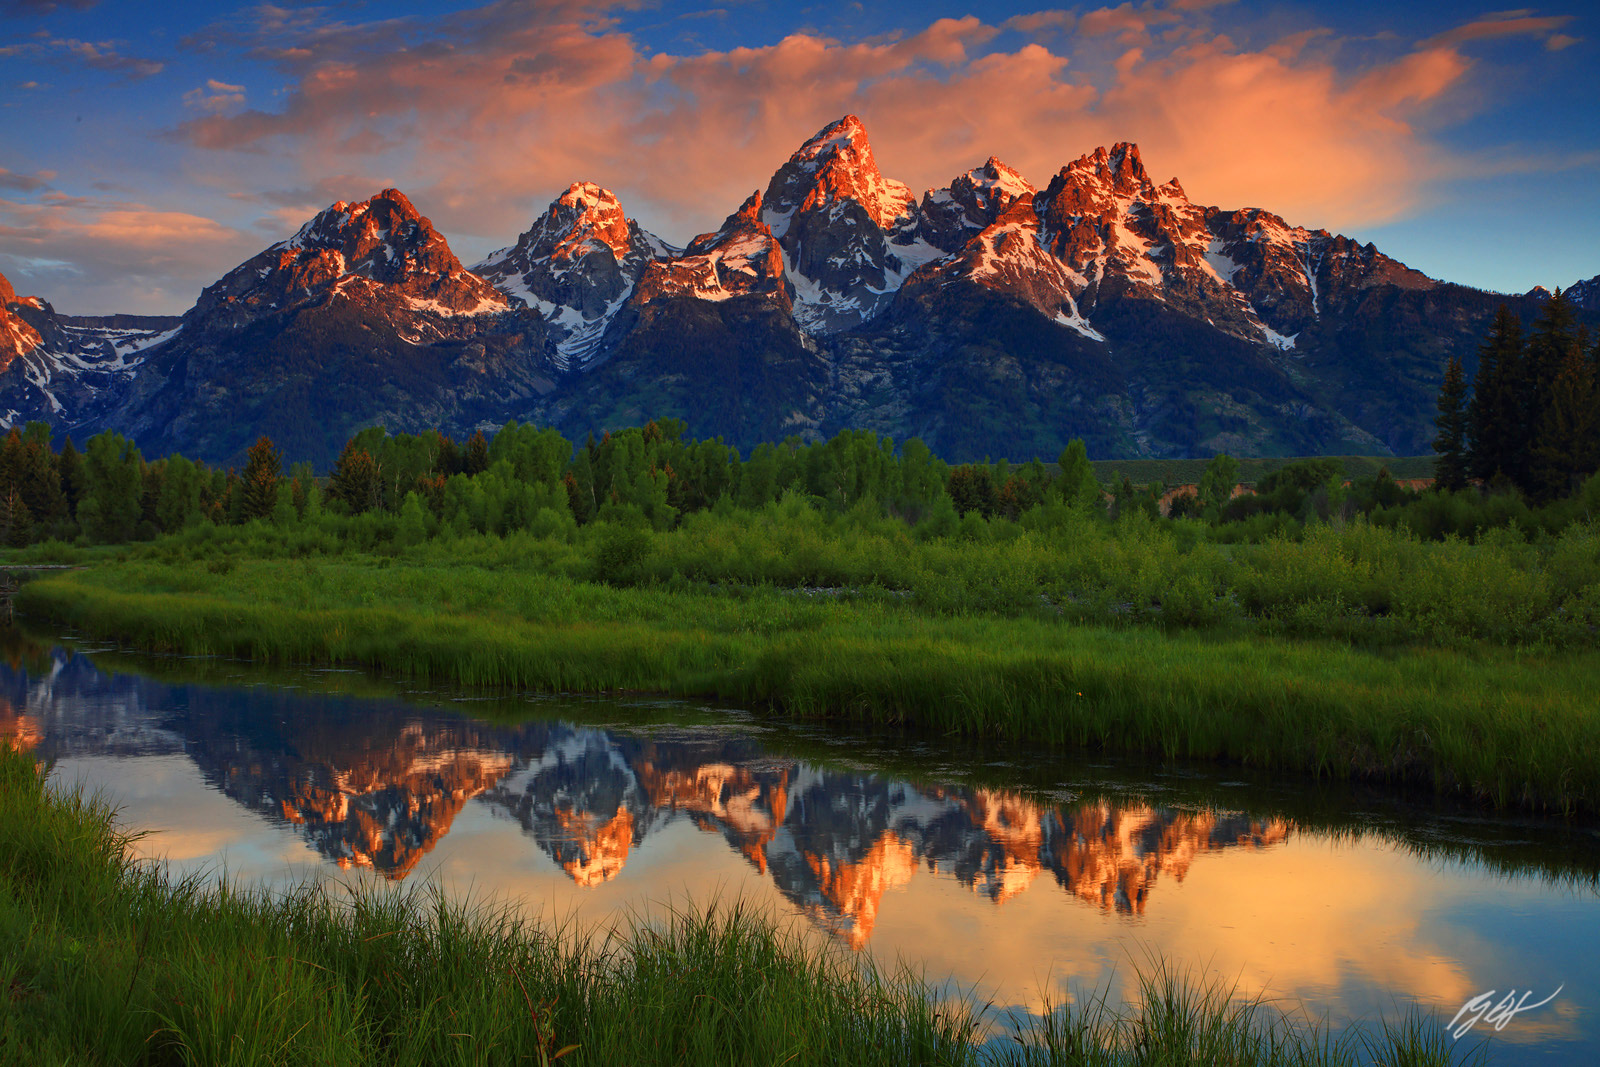 Sunrise and the Grand Tetons Reflected in Beaver Ponds at Schwabacher's Landing in Grand Teton National Park in Wyoming